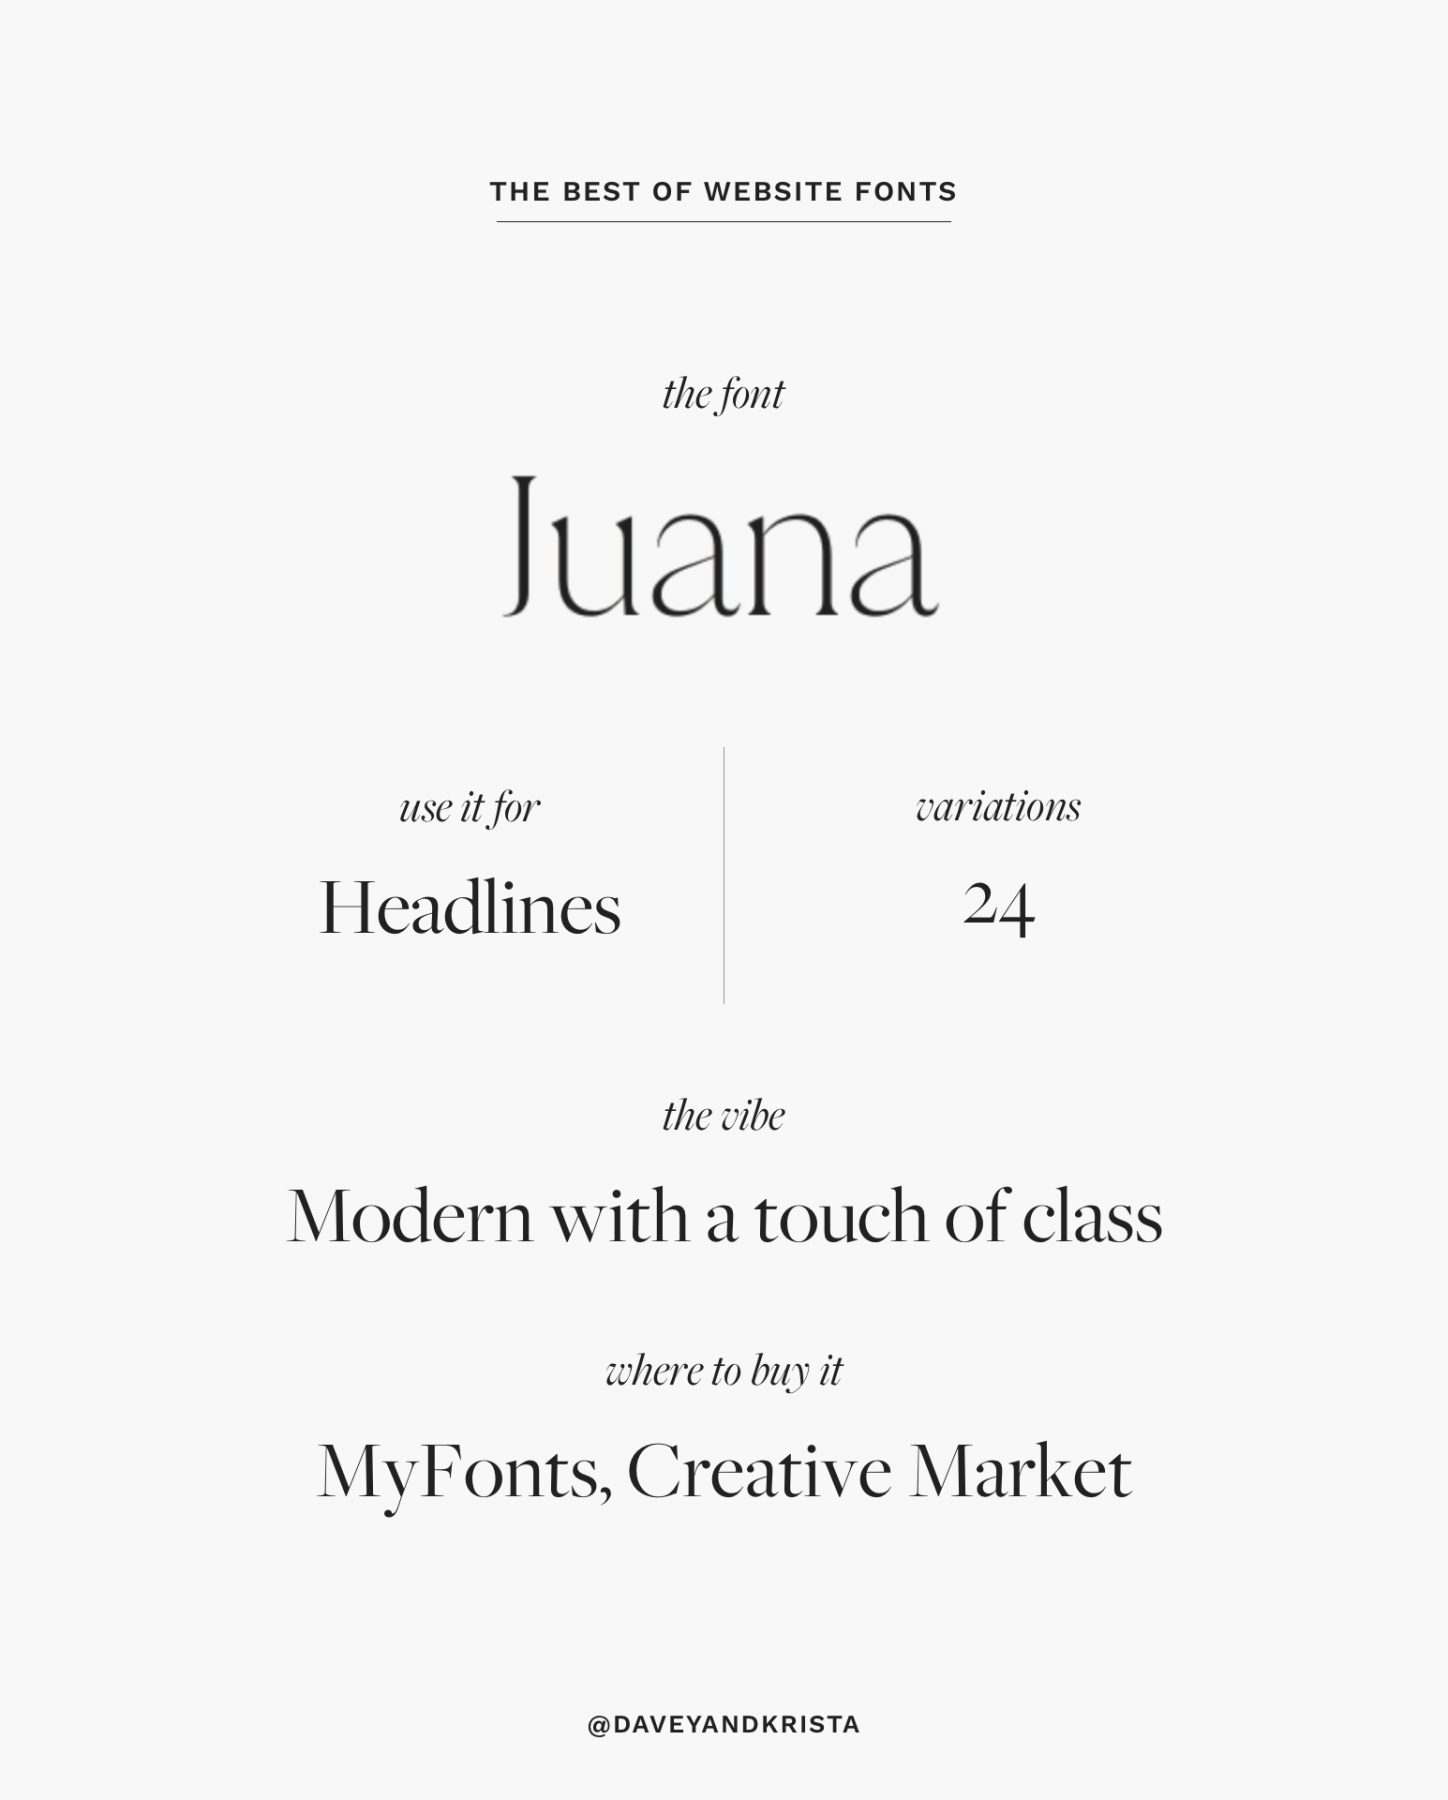 Juana - a modern yet classic font for websites. Available in 24 weights. | The Best Fonts for Websites